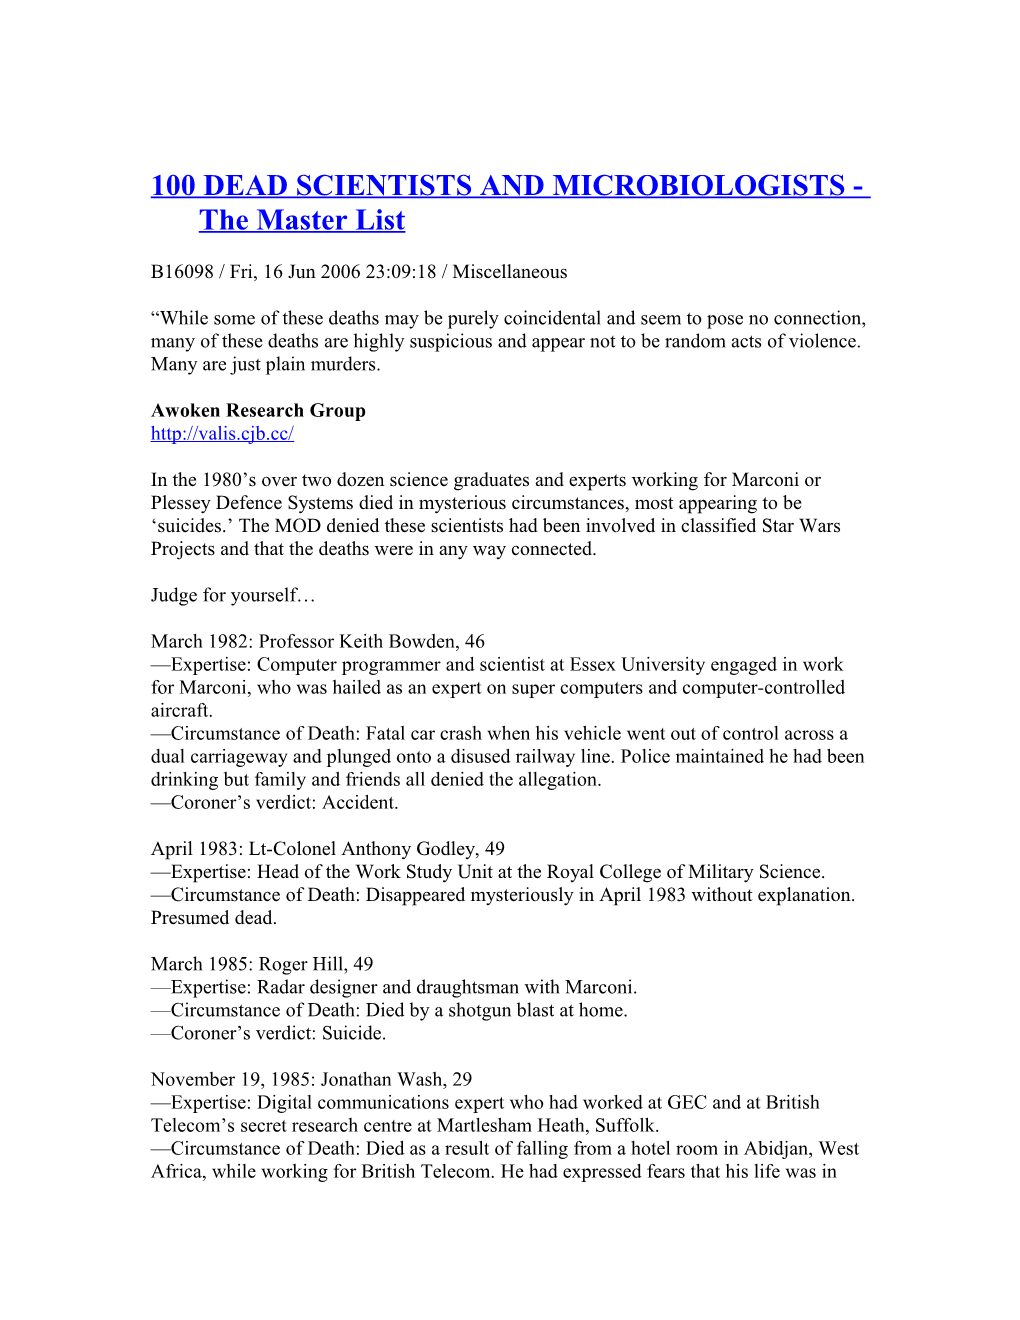 100 DEAD SCIENTISTS and MICROBIOLOGISTS - the Master List